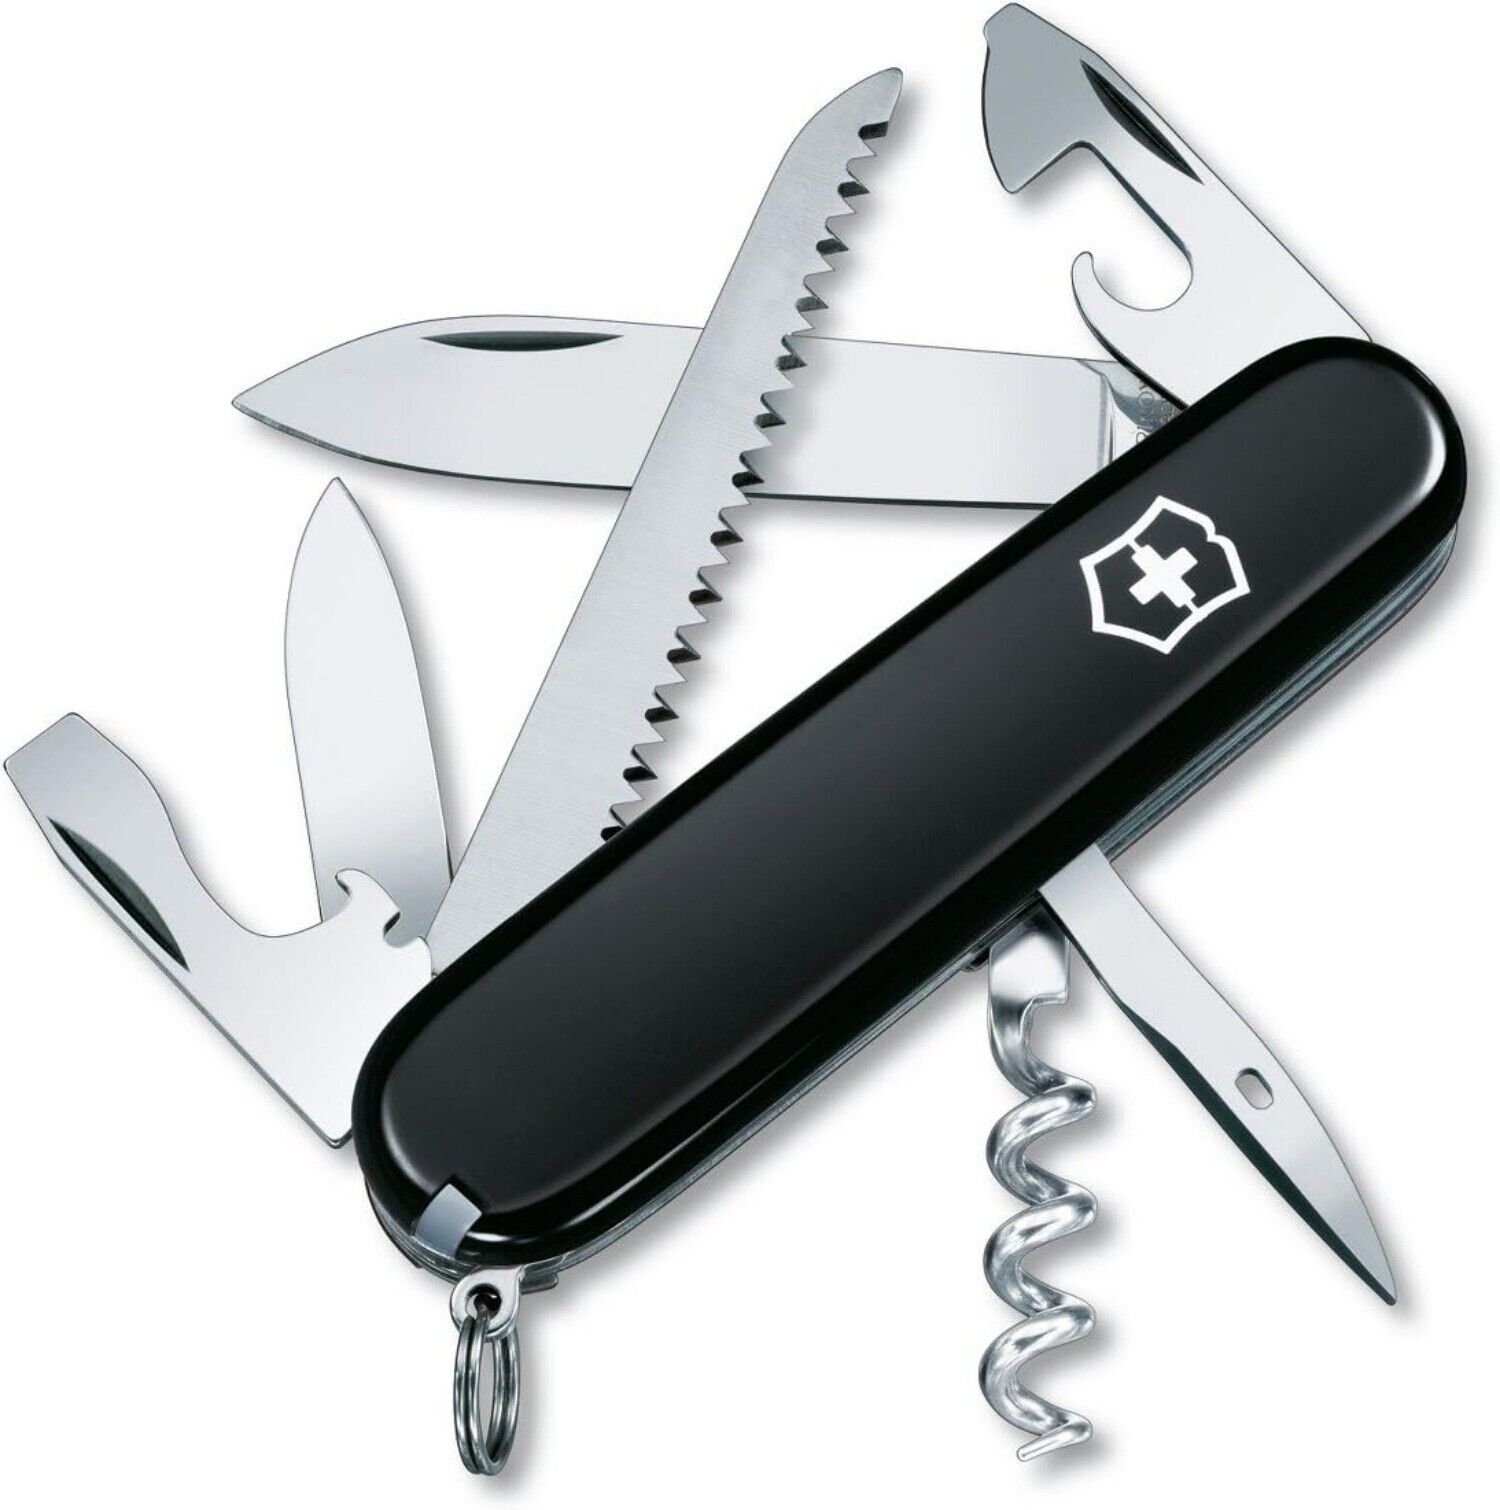 13 Function Swiss Made Pocket Knife with Large Blade, Screwdriver